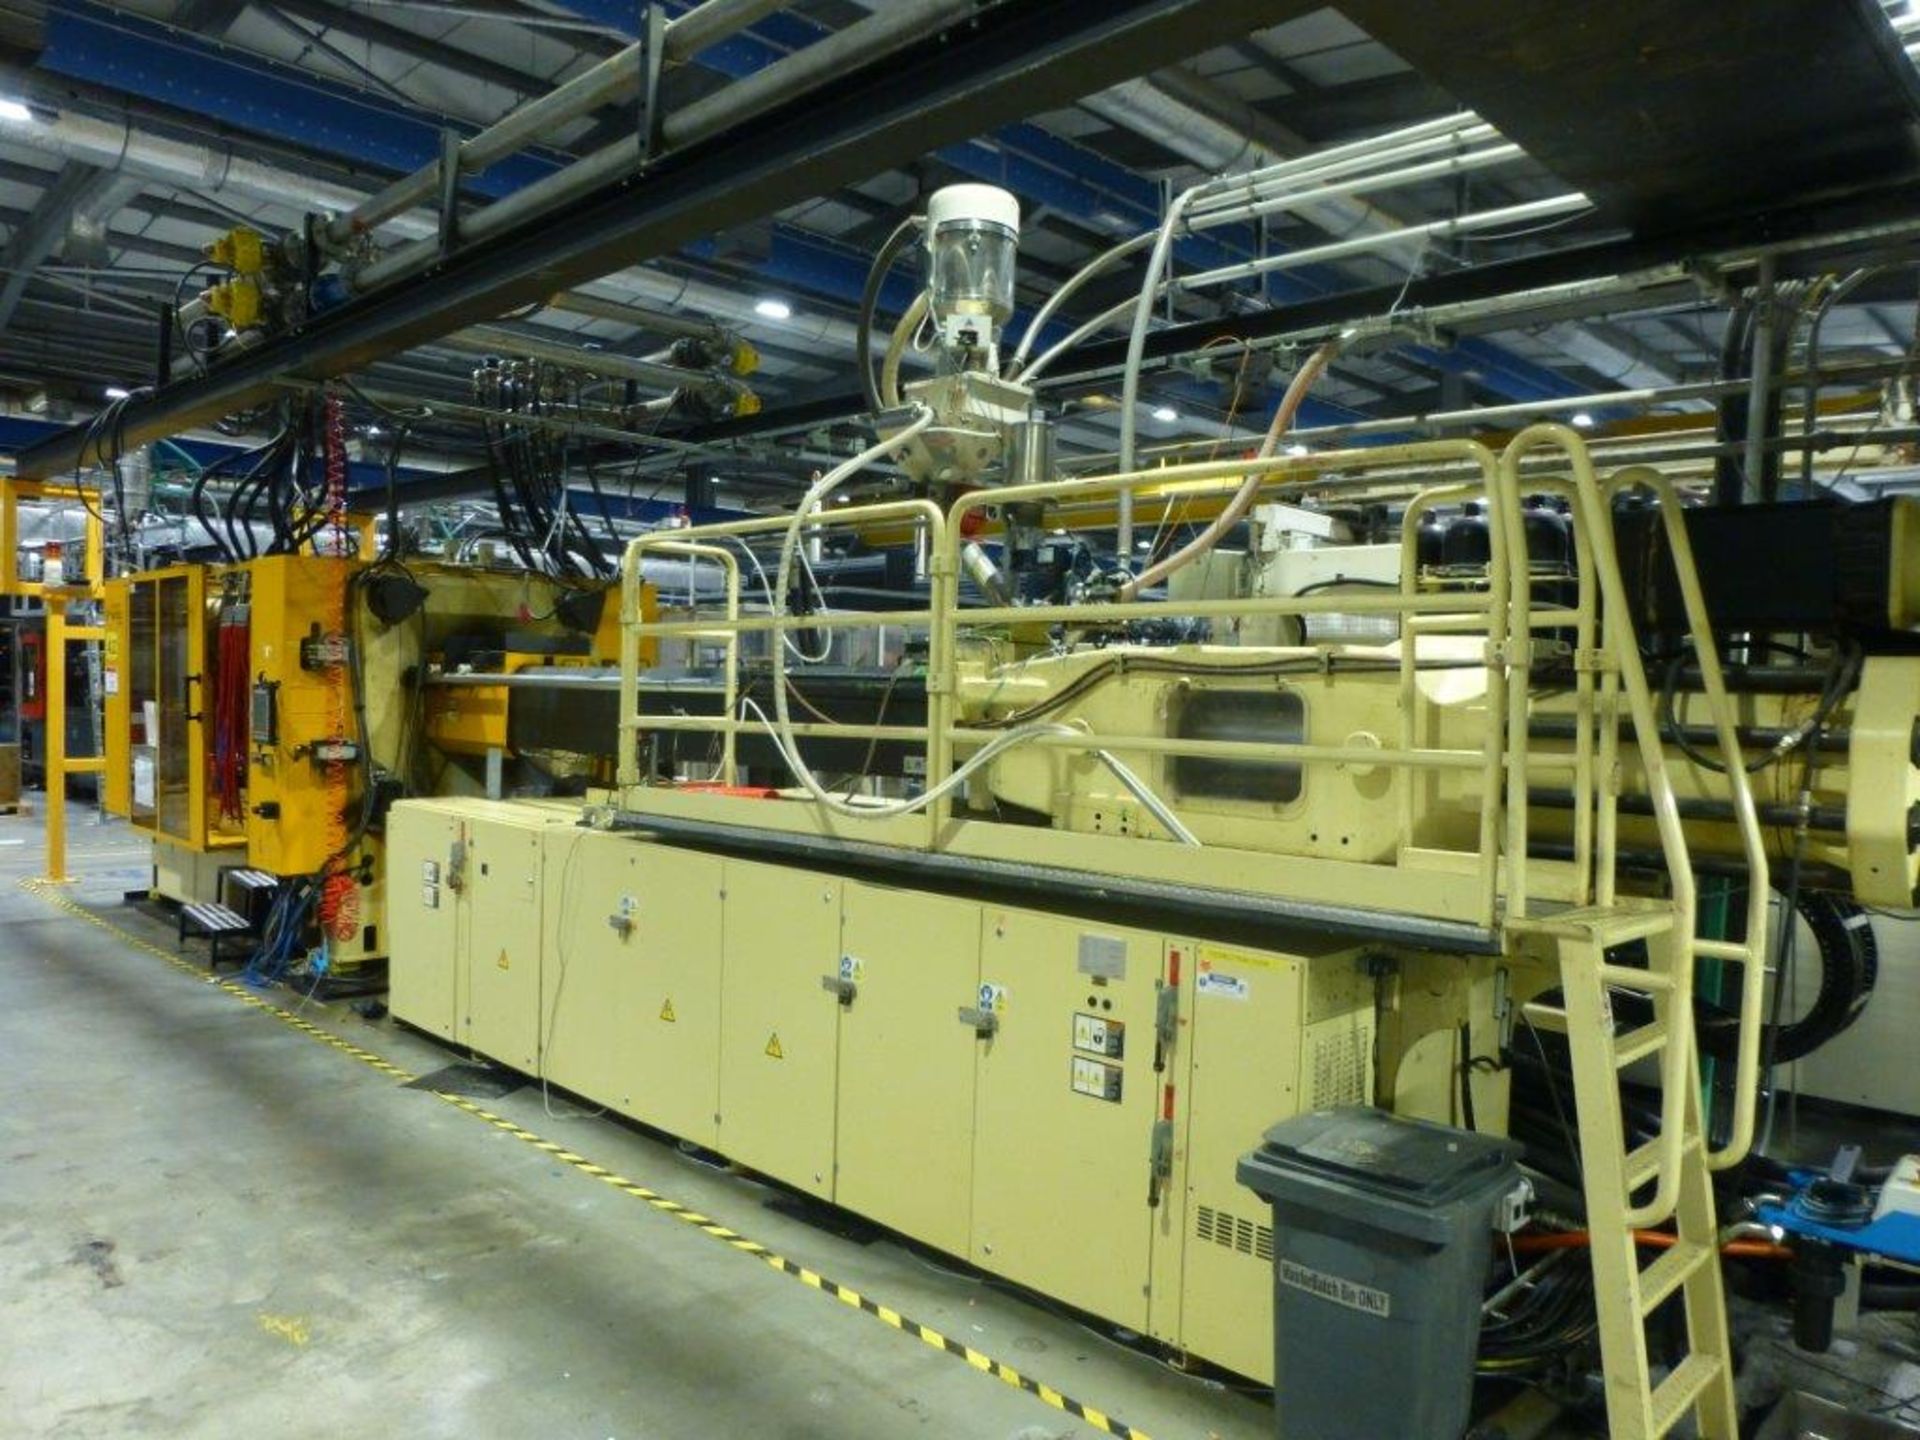 Husky H600 RS135/115 CNC Plastic Injection Moulding Machine Serial No. 3061084 (2005) with Polaris - Image 2 of 5